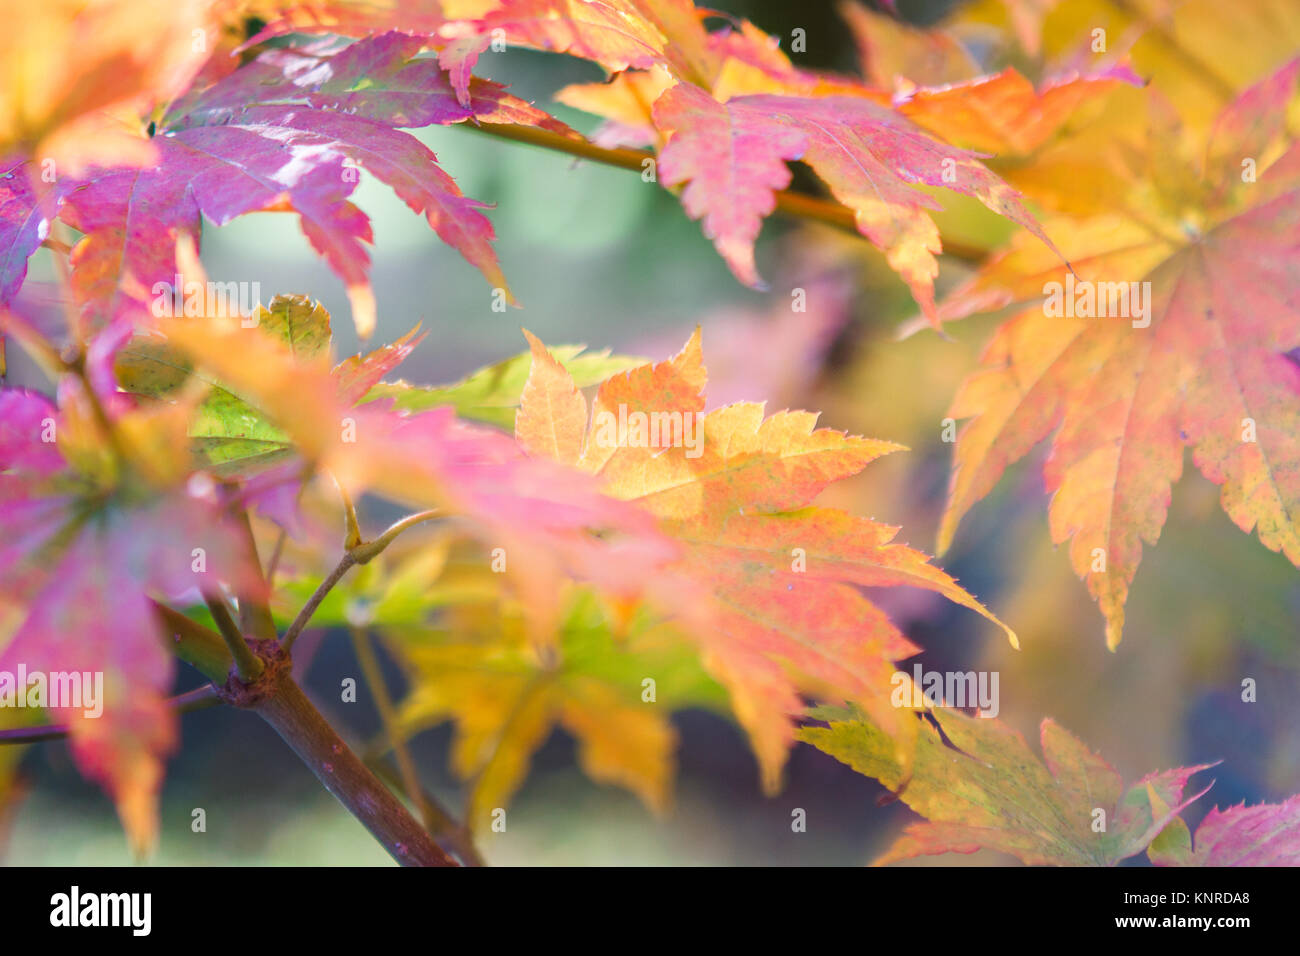 Fall leaves abstract Stock Photo